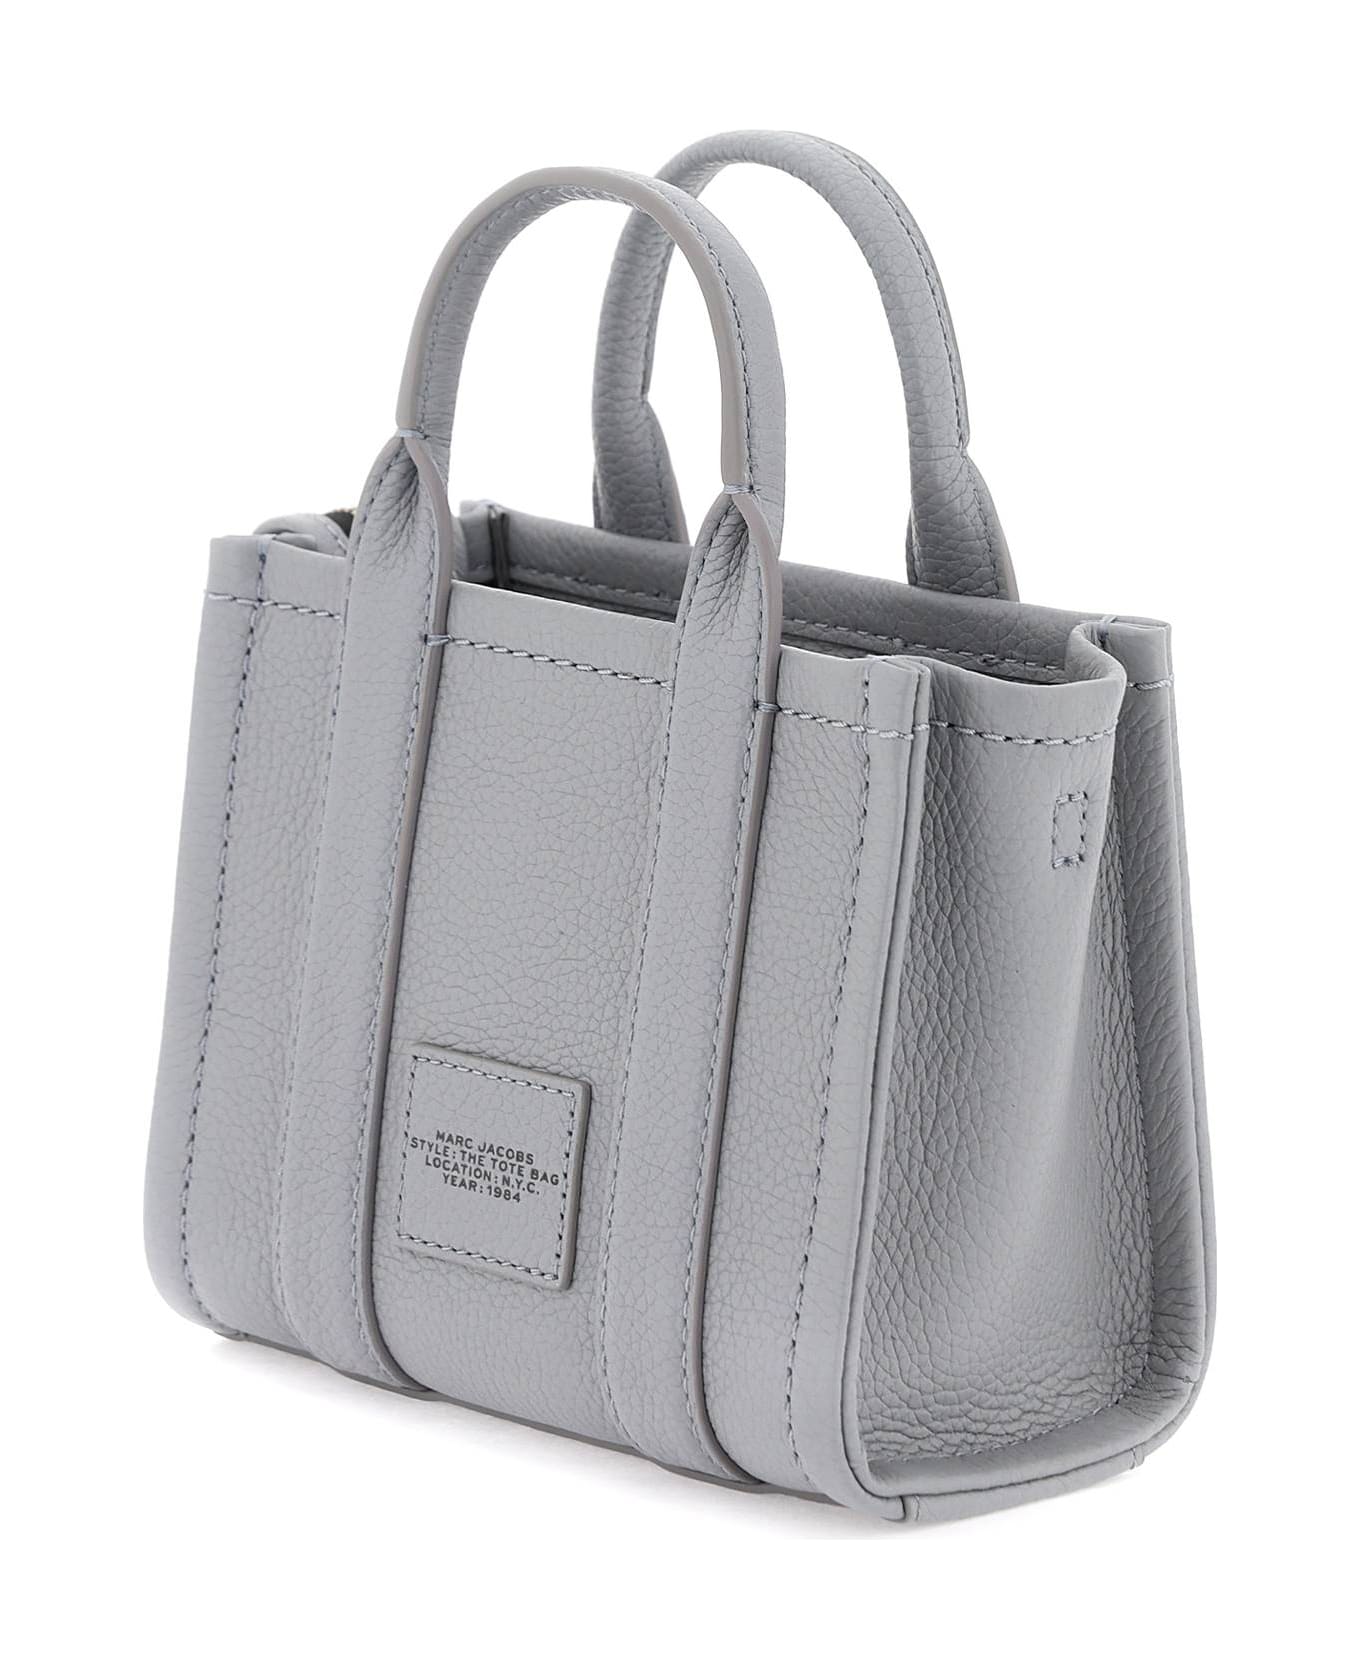 Marc Jacobs The Leather Mini Tote Bag - WOLF GREY (Grey)